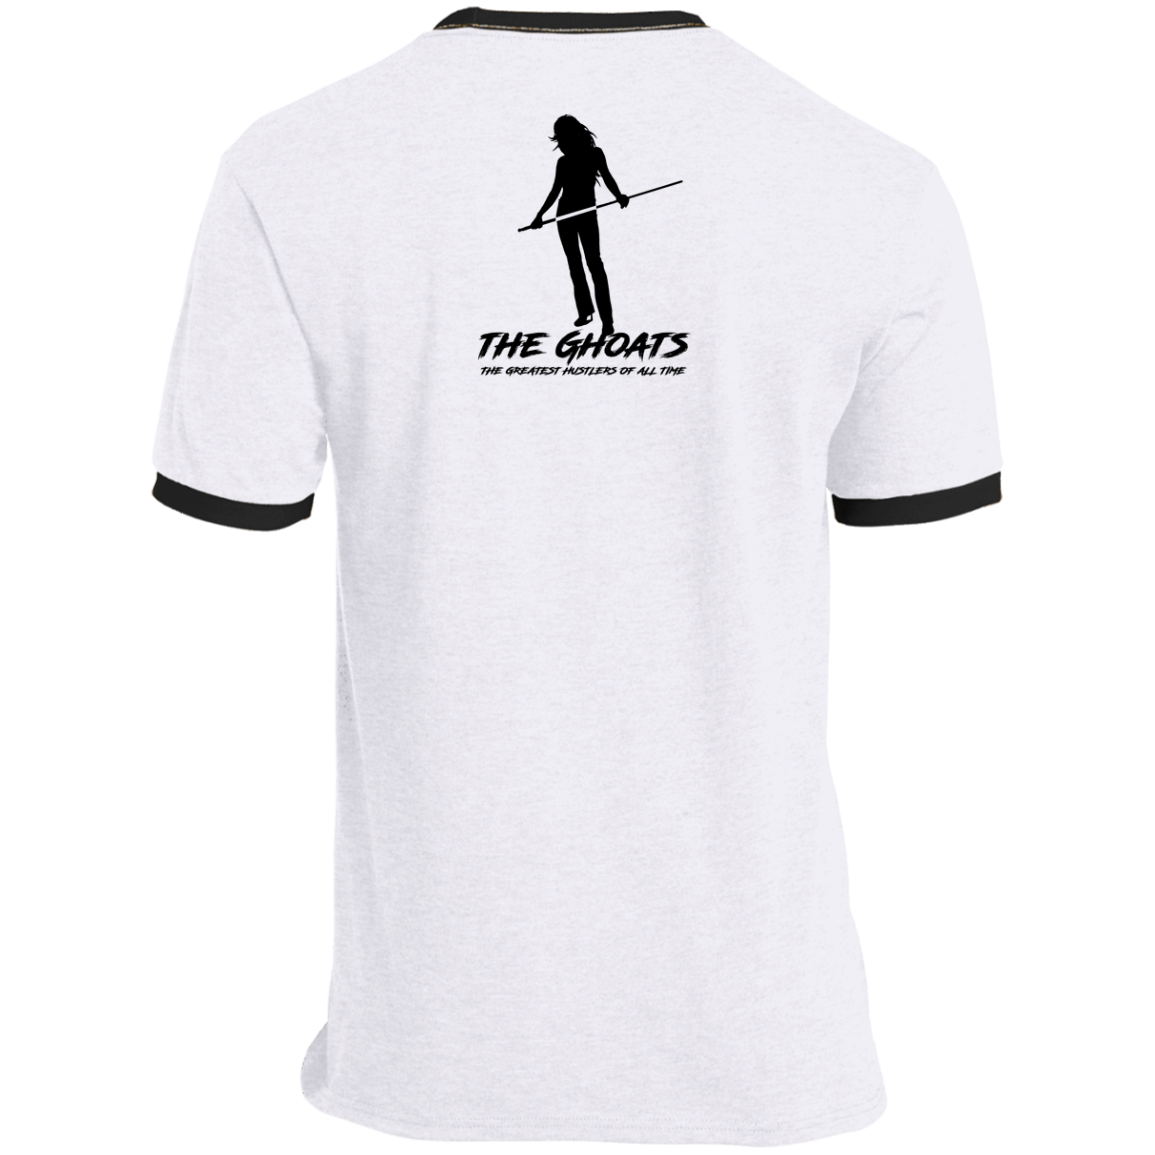 The GHOATS Custom Design. #34 Beware of Sharks. Play at Your Own Risk. (Ladies only version). Ringer Tee